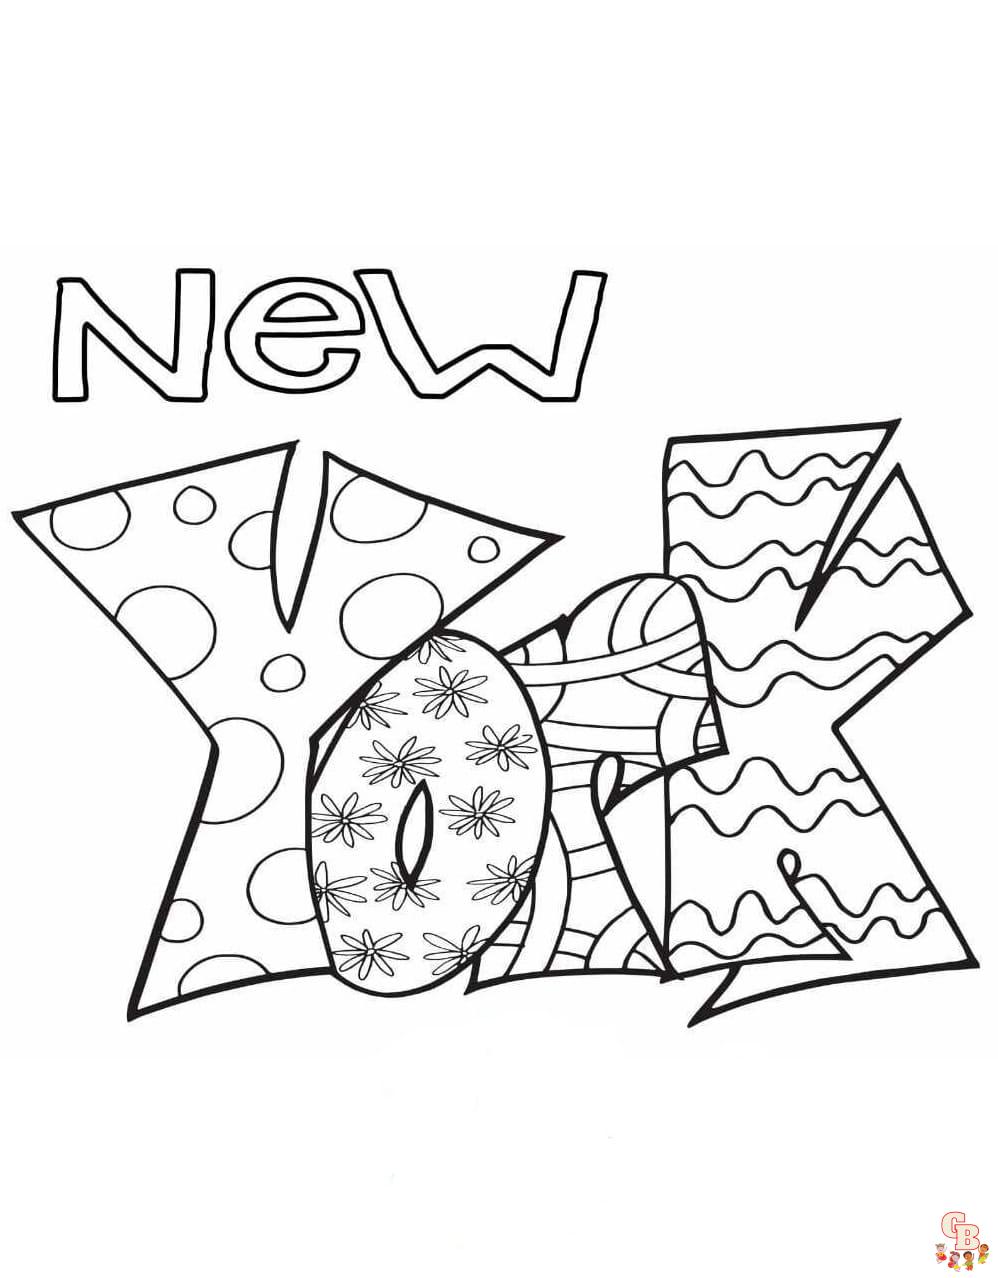 Printable new york coloring pages free for kids and adults